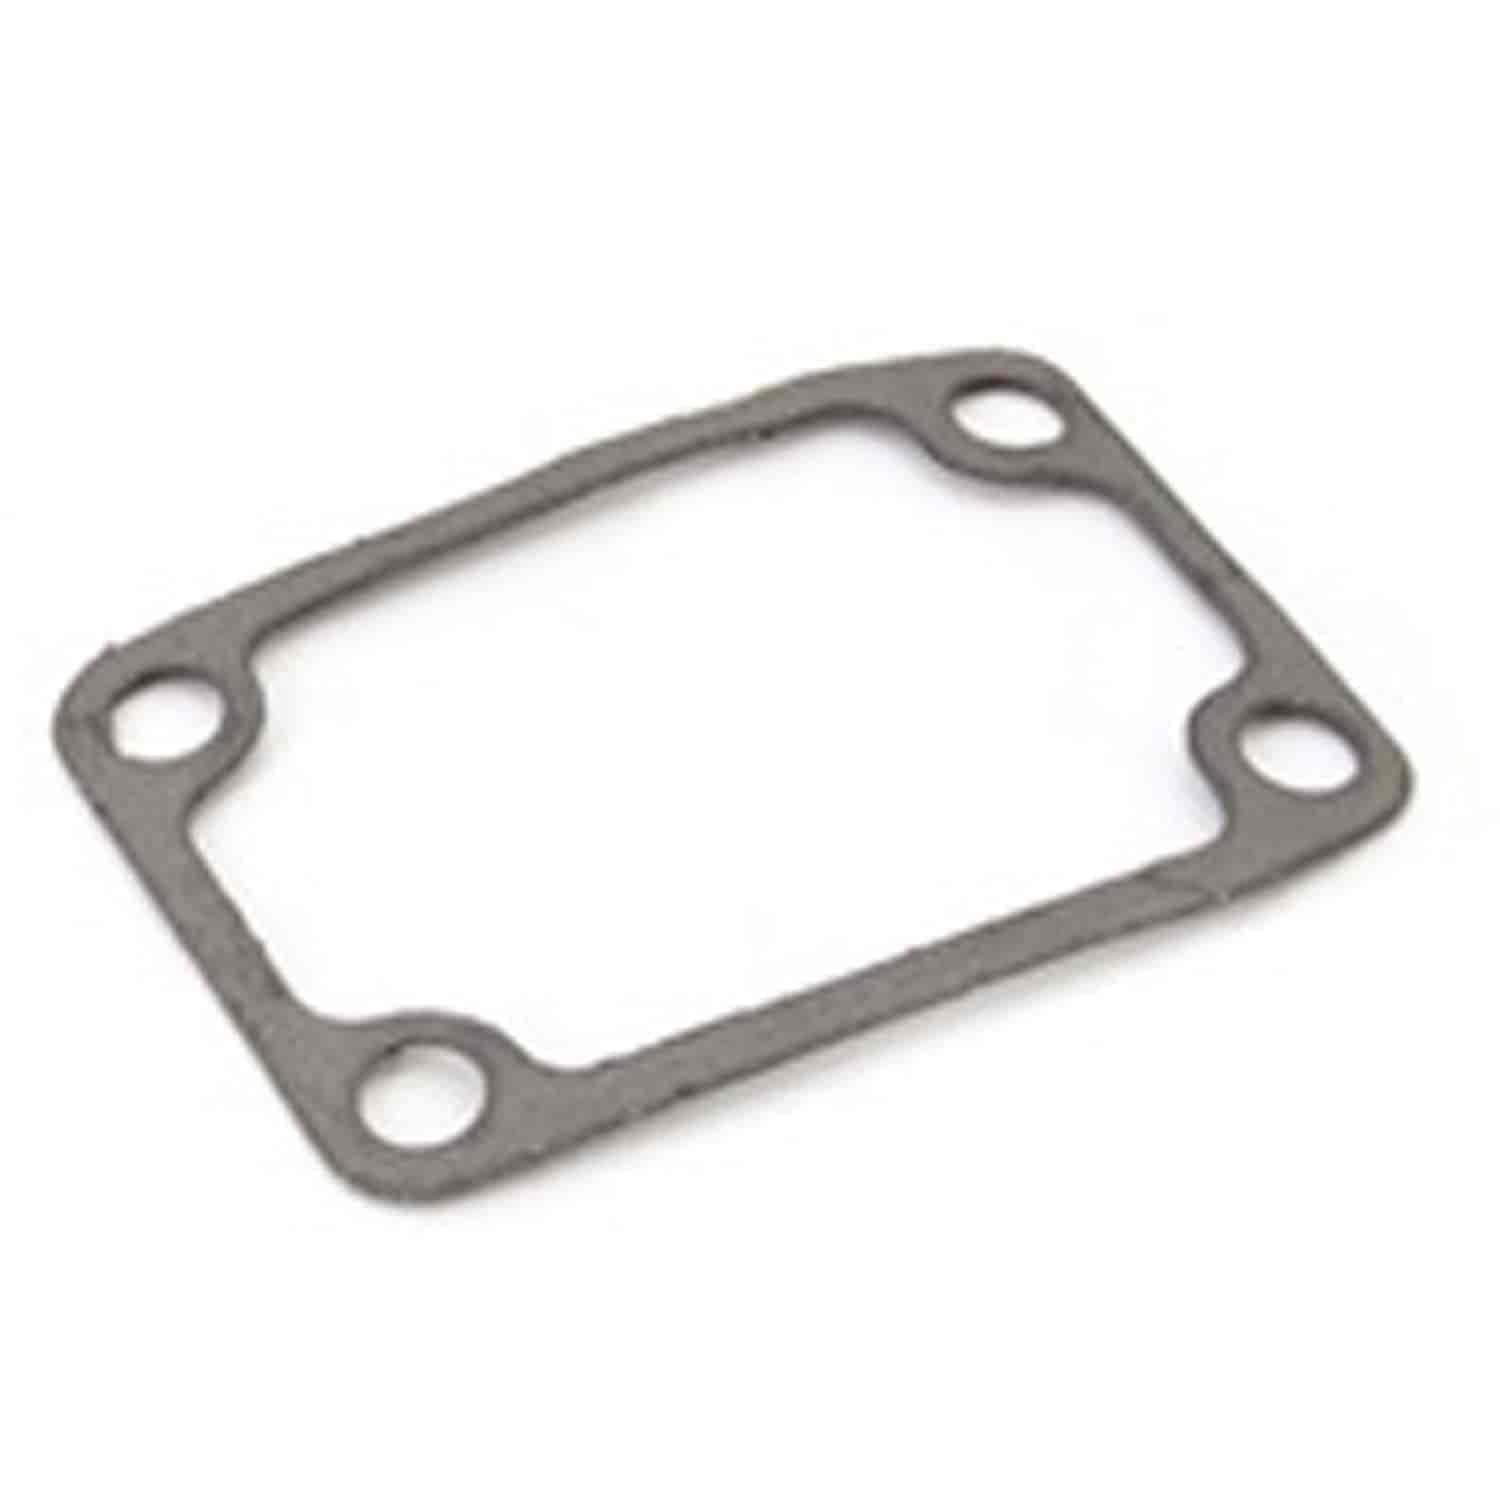 Replacement exhaust gasket from Omix-ADA, Fits 72-79 Jeep CJs with 4.2 liter 6-cylinder engine.